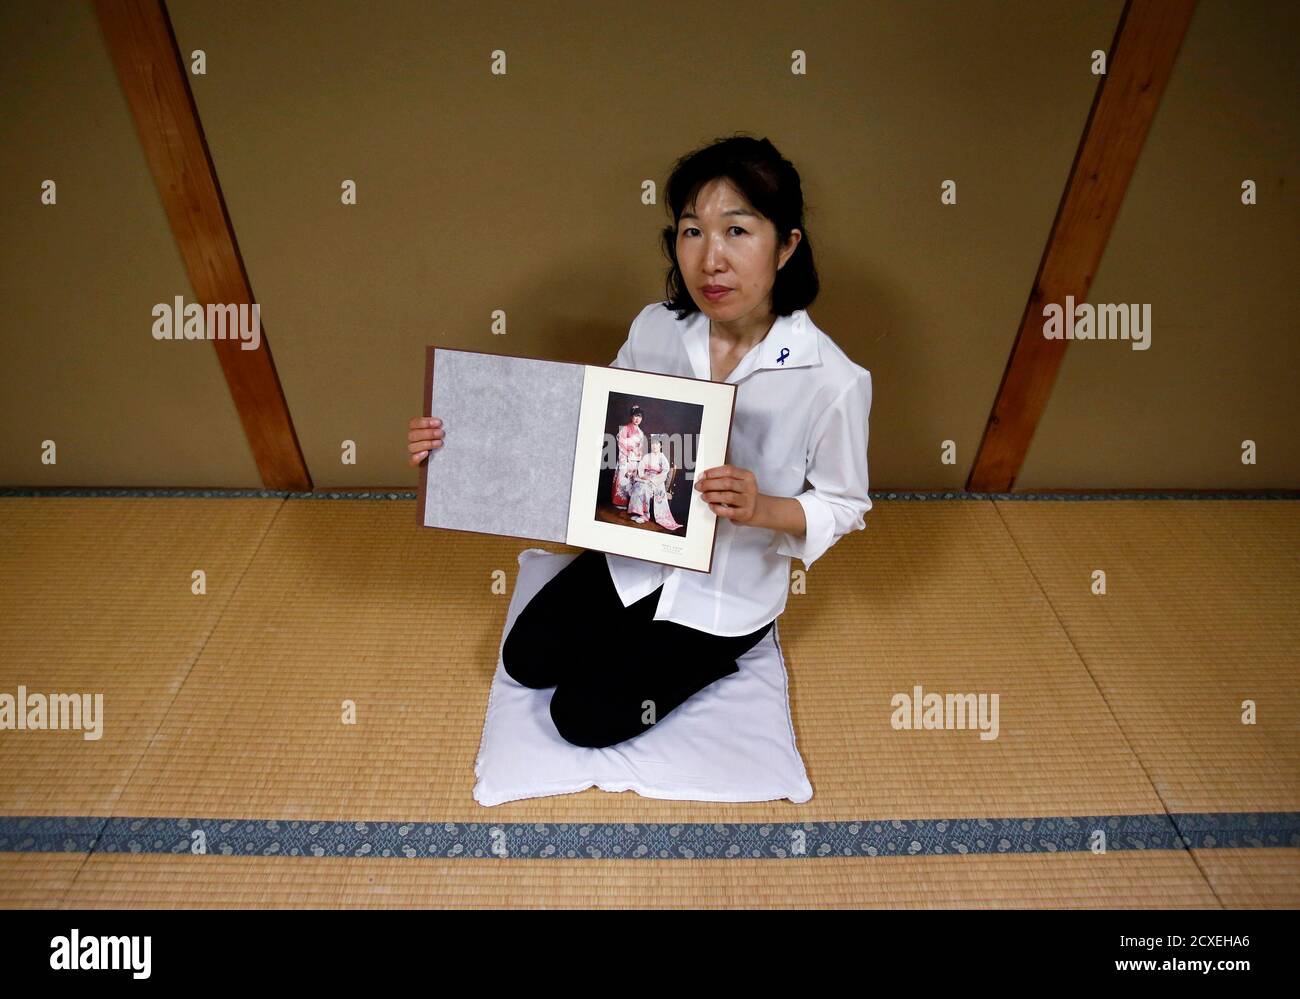 Misa Morimoto, the 50-year-old identical younger twin of Miho Yamamoto, shows a photograph of Miho and herself wearing traditional Japanese clothes known as Kimono taken to celebrate their 20th birthdays in 1984, during an interview with Reuters in Otsuki city, Yamanashi prefecture, July 15, 2014. Morimoto spoke to no one for 18 years about her identical twin sister who vanished when they were 20, not even to her own children. On the rare occasions when asked, she lied and said her sister was studying overseas. But slowly the pain of uncertainty about her sister's fate was replaced by suspicio Stock Photo